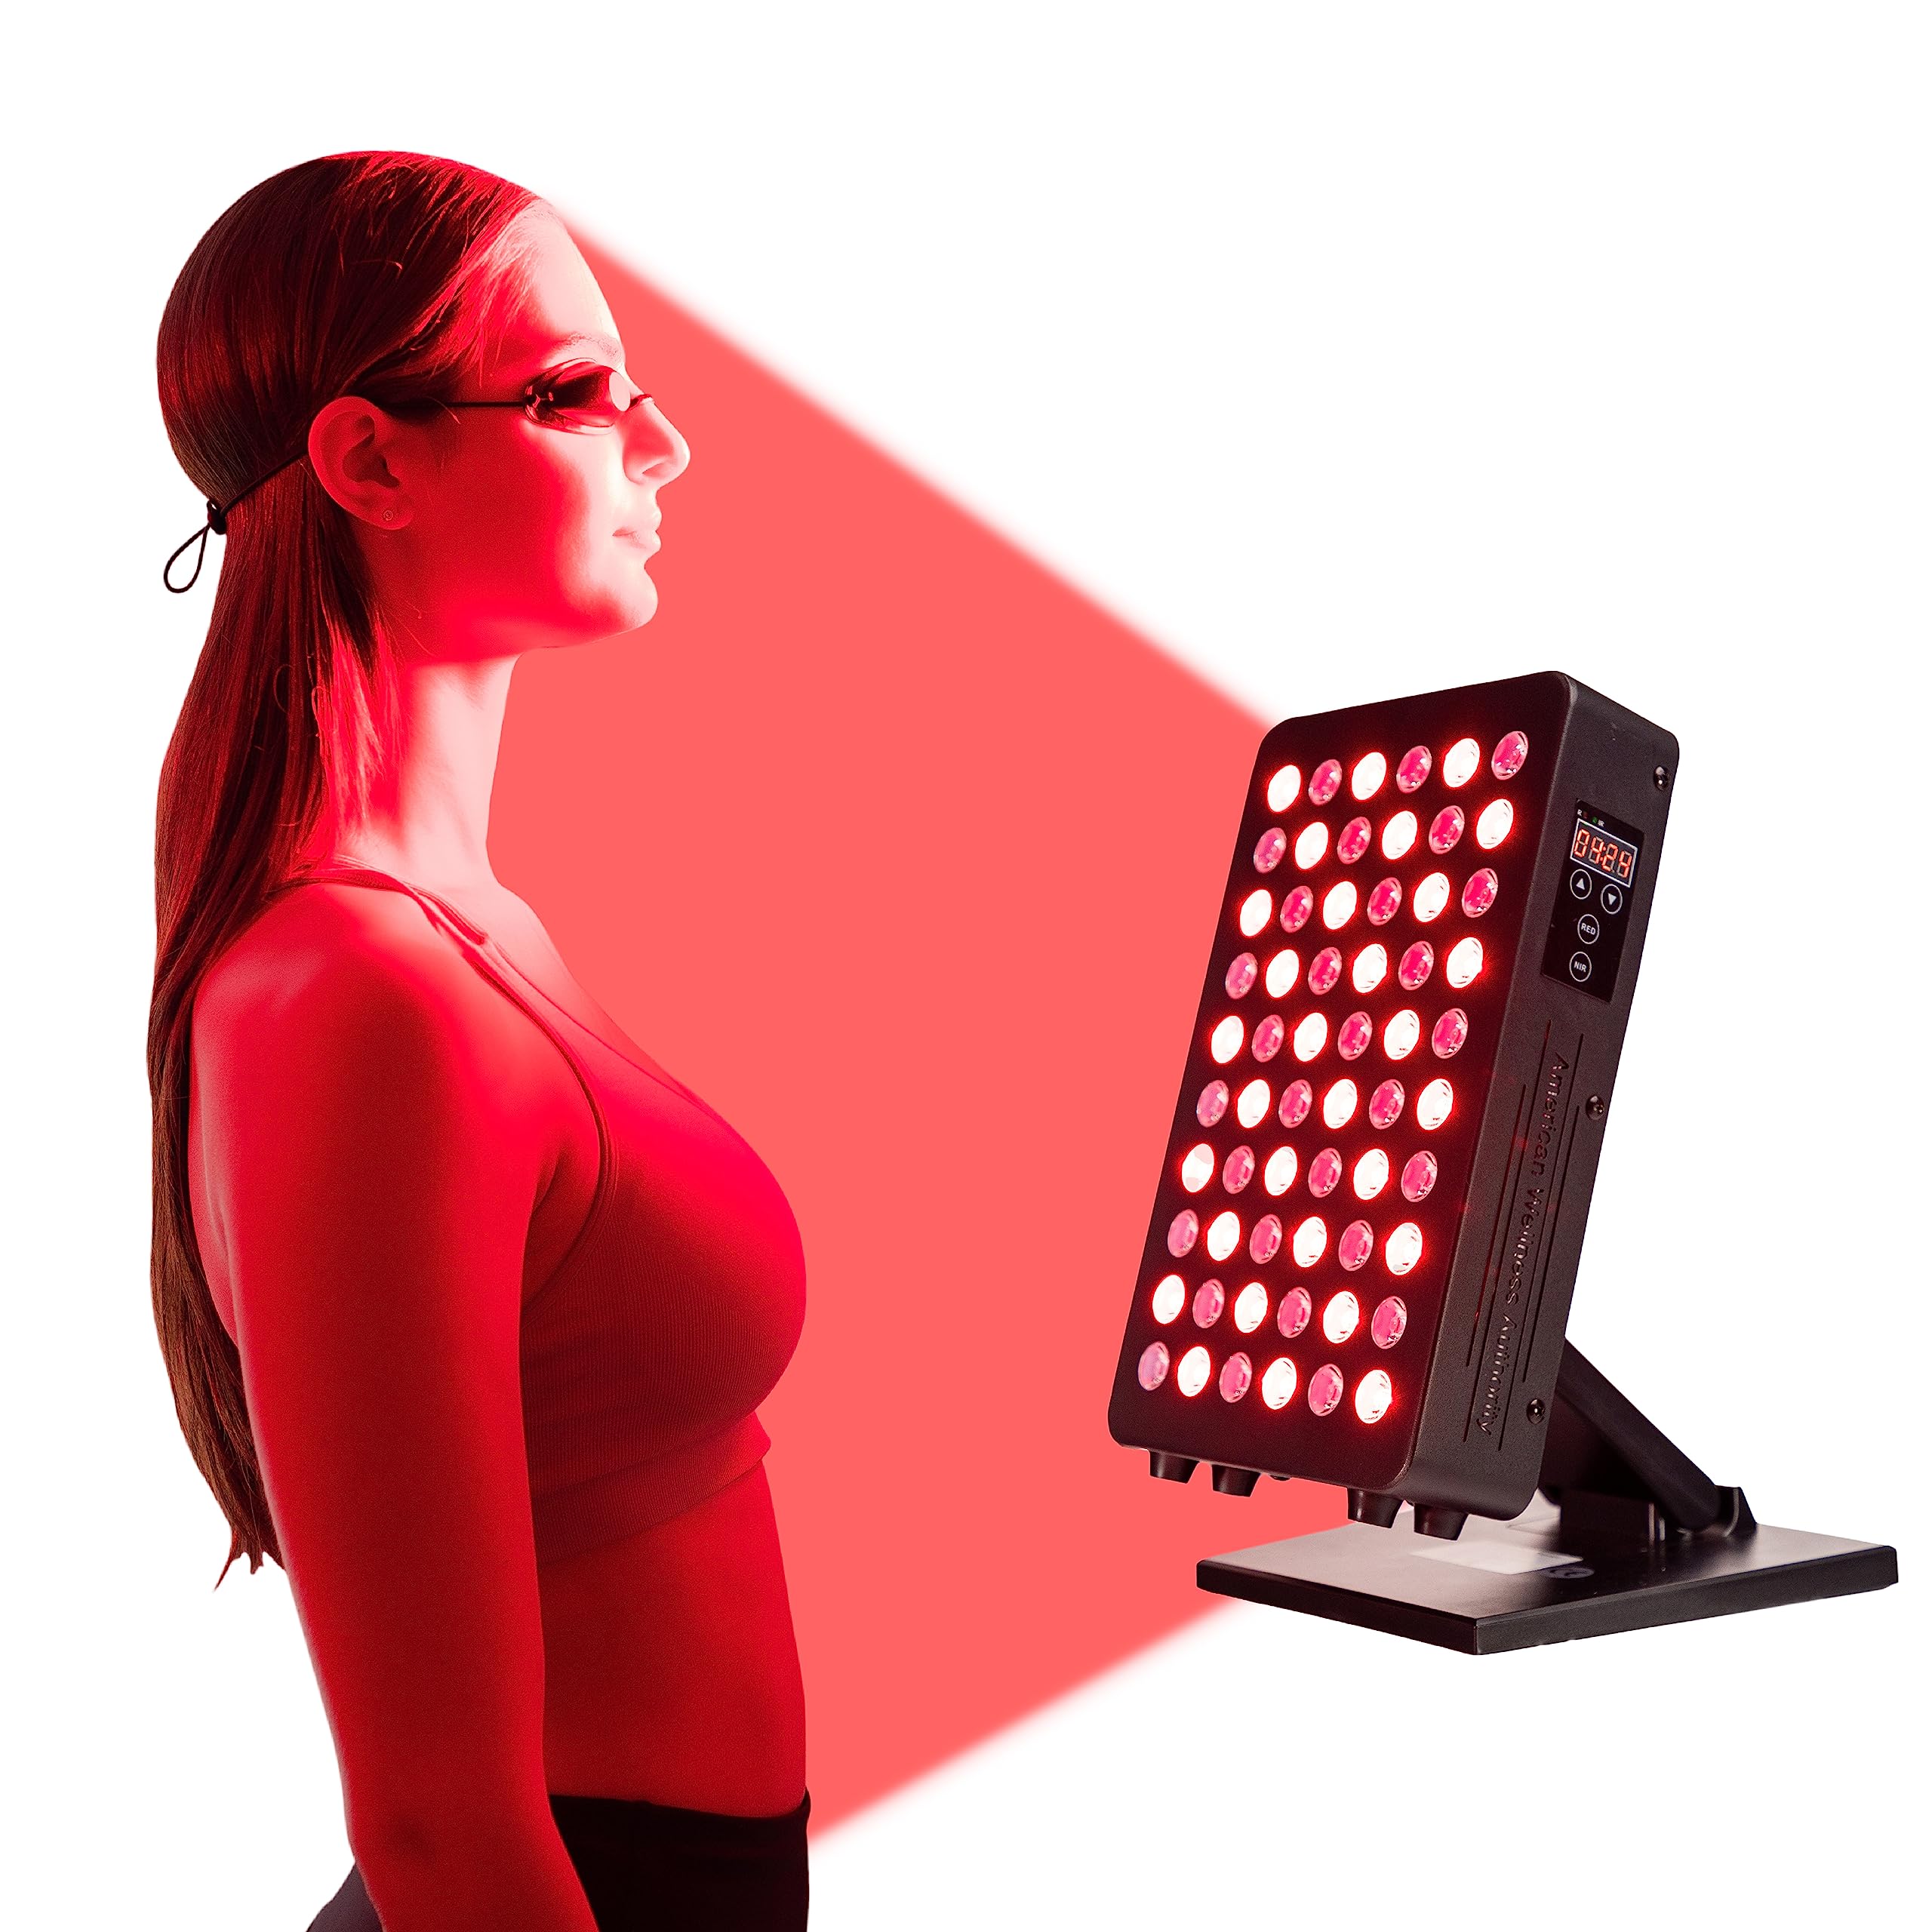 American Wellness Authority FX500 Red Light Therapy for Face, Device with Stand, Includes Remote Control, Timer & Infrared Light Therapy for Body, Made in FDA Registered Facility